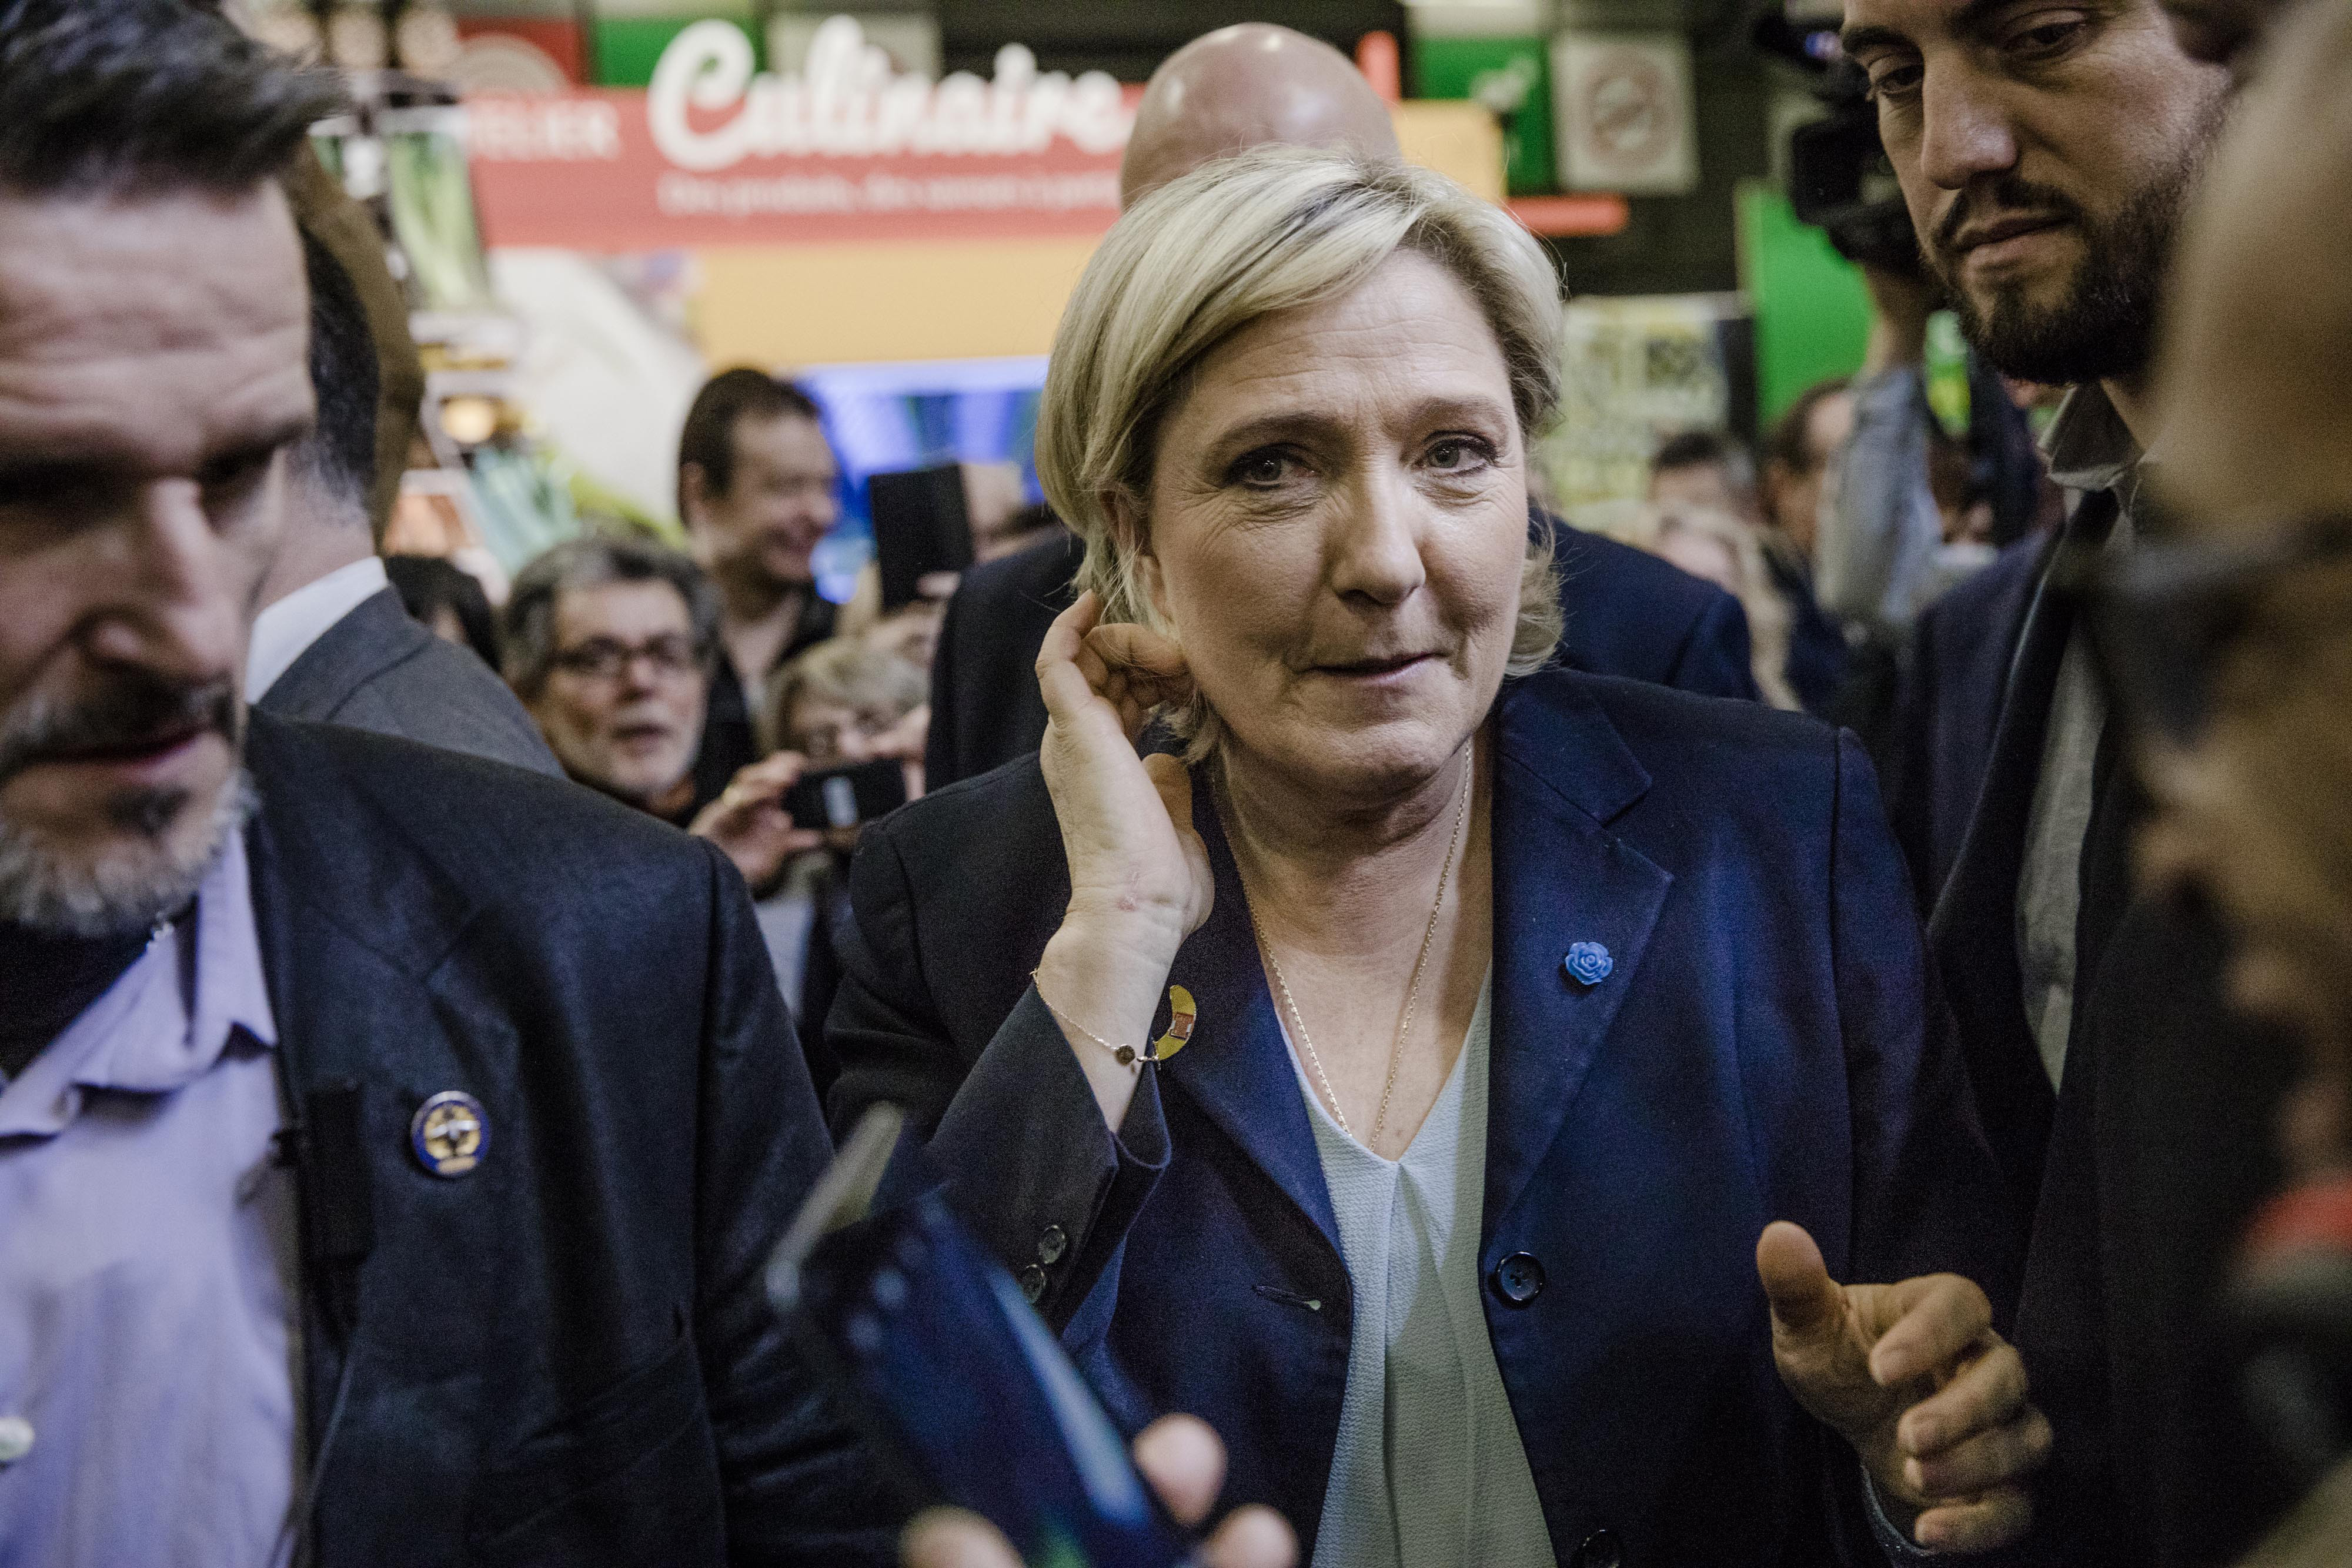 Marine Le Pen, France's presidential candidate and leader of the French National Front, tours the Paris International Agriculture Fair in Paris, France, on Tuesday, Feb. 28, 2017. Earlier last week, Le Pen refused a non-binding summons to be interviewed by French police over use of European Parliament funds to pay for party work in France. (Marlene Awaad/Bloomberg via Getty Images)